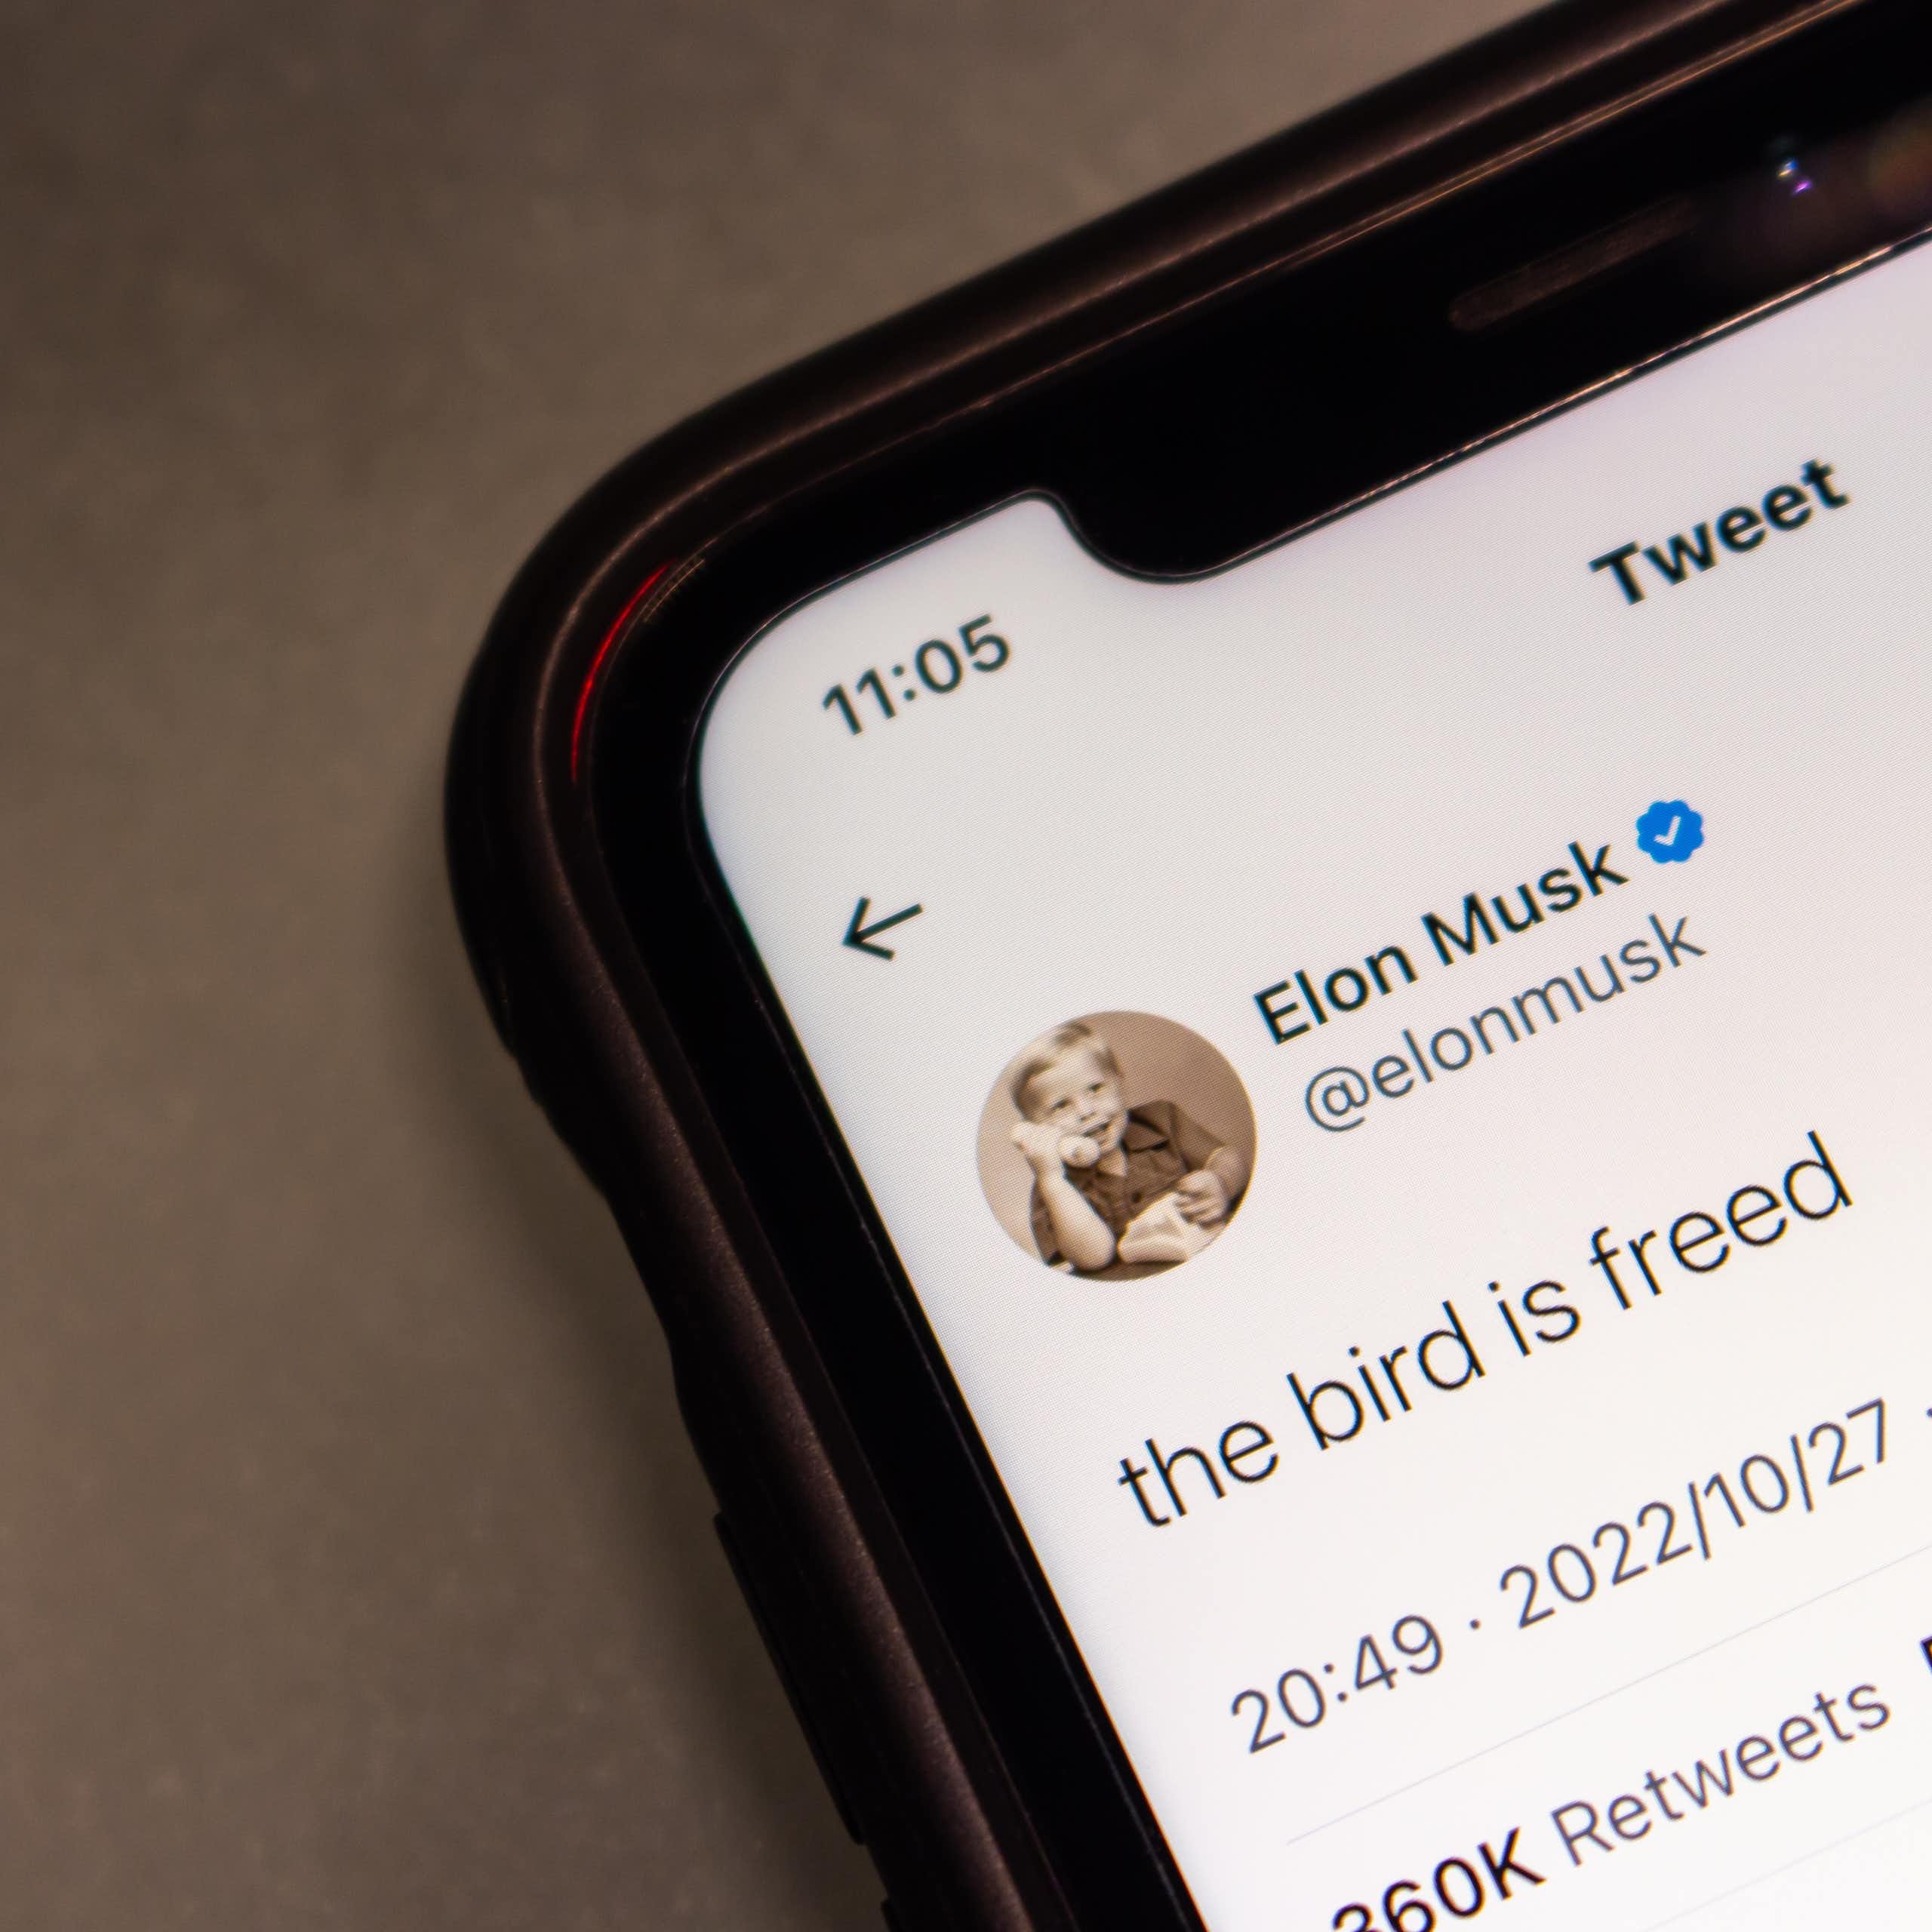 Photo of a phone with a tweet from Elon Musk: "the bird is freed".